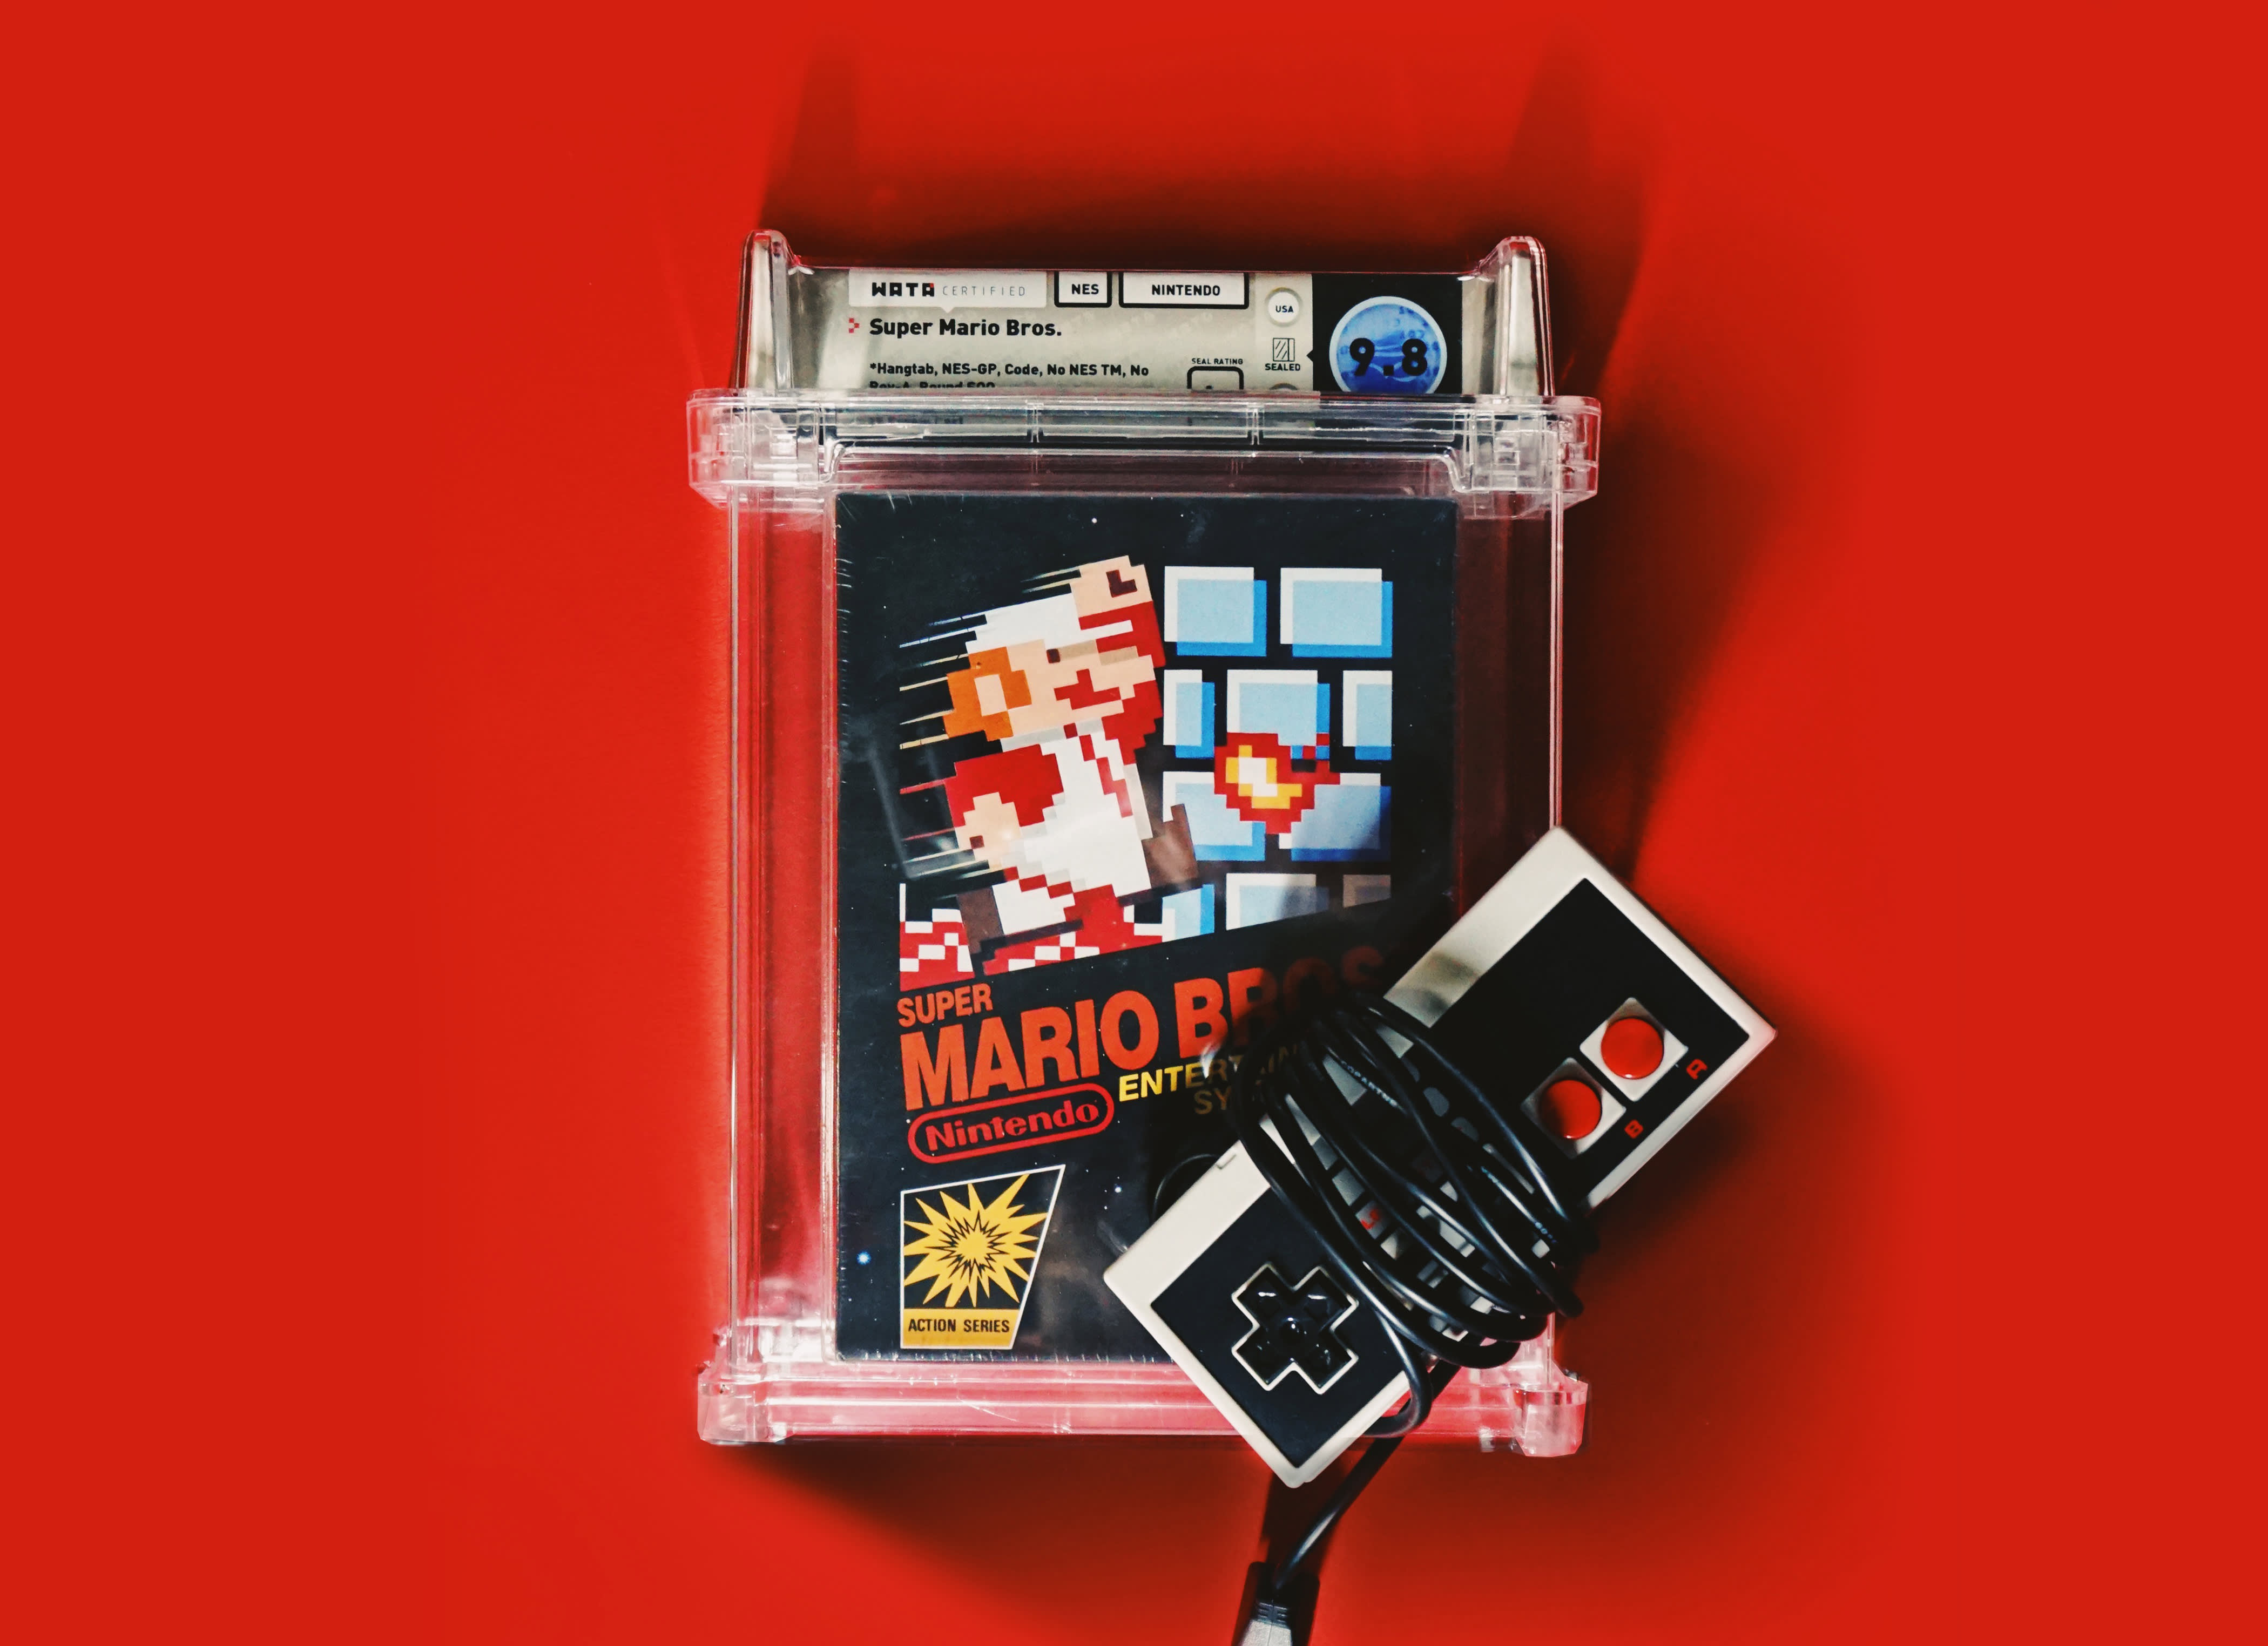 rouw hebben steno Rally co-founder on record sale of 'Super Mario Bros', NFTs, investing